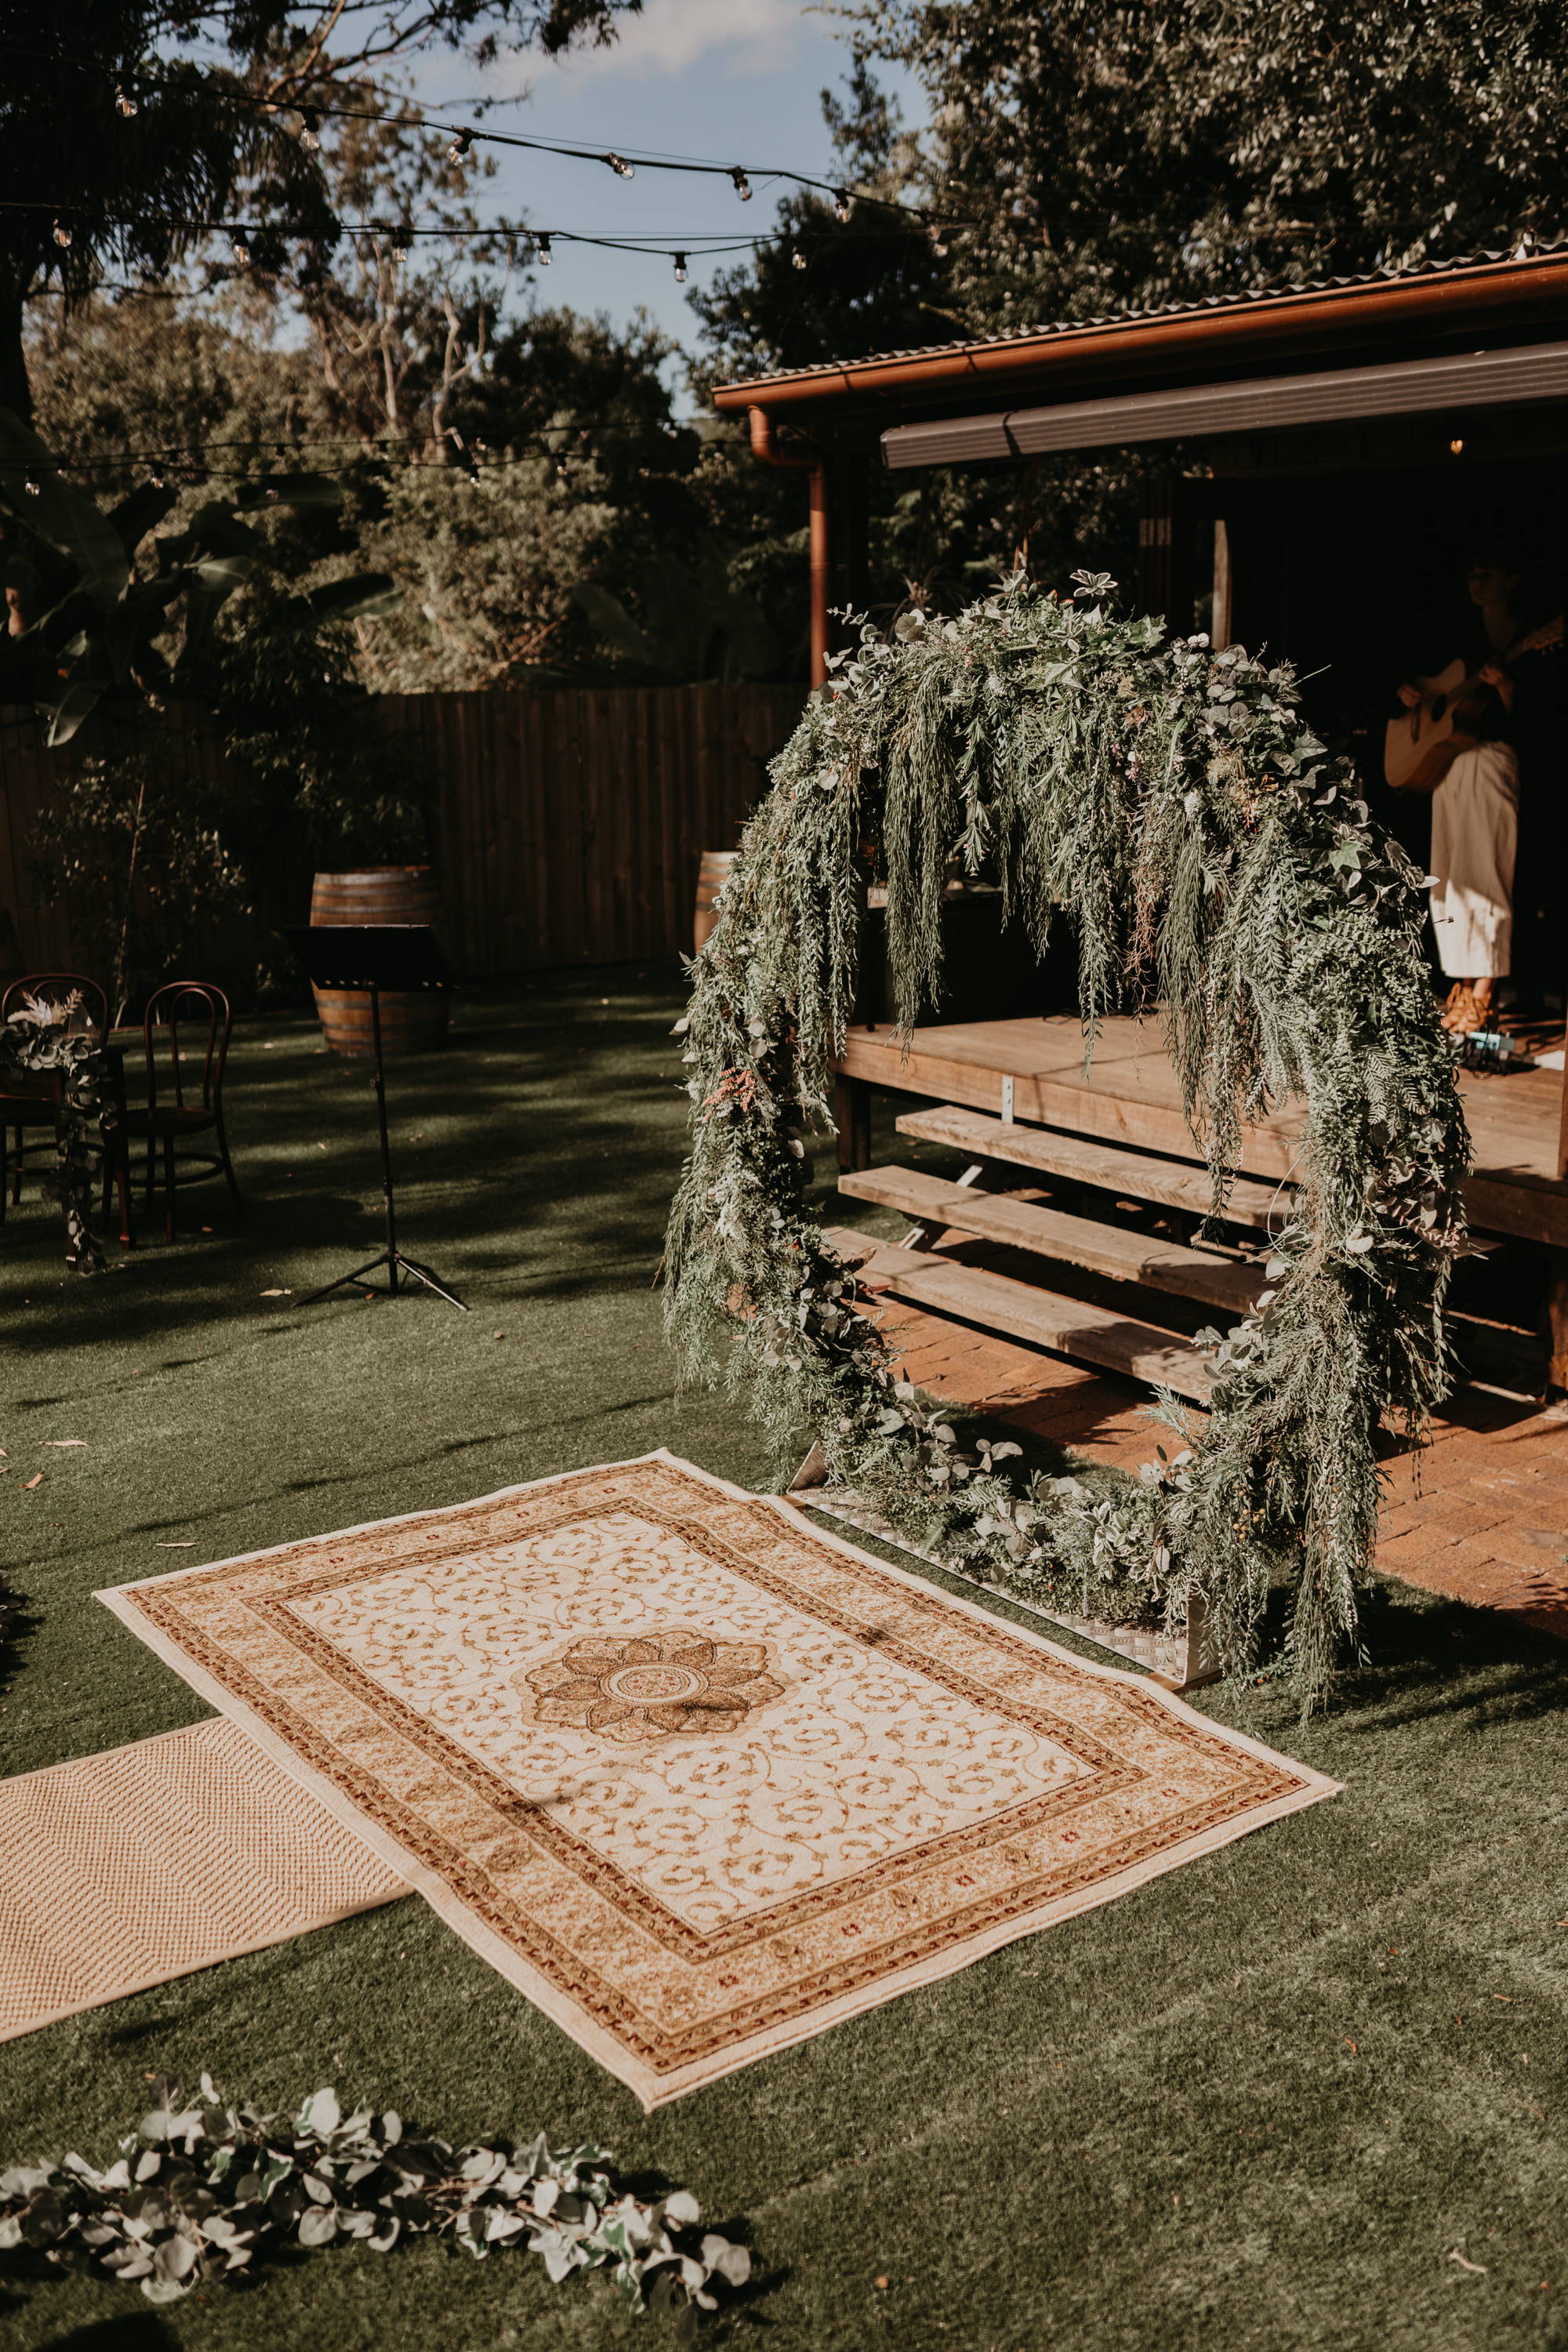 Garden wedding with rustic rug and circle shaped arbor gathered with leaves